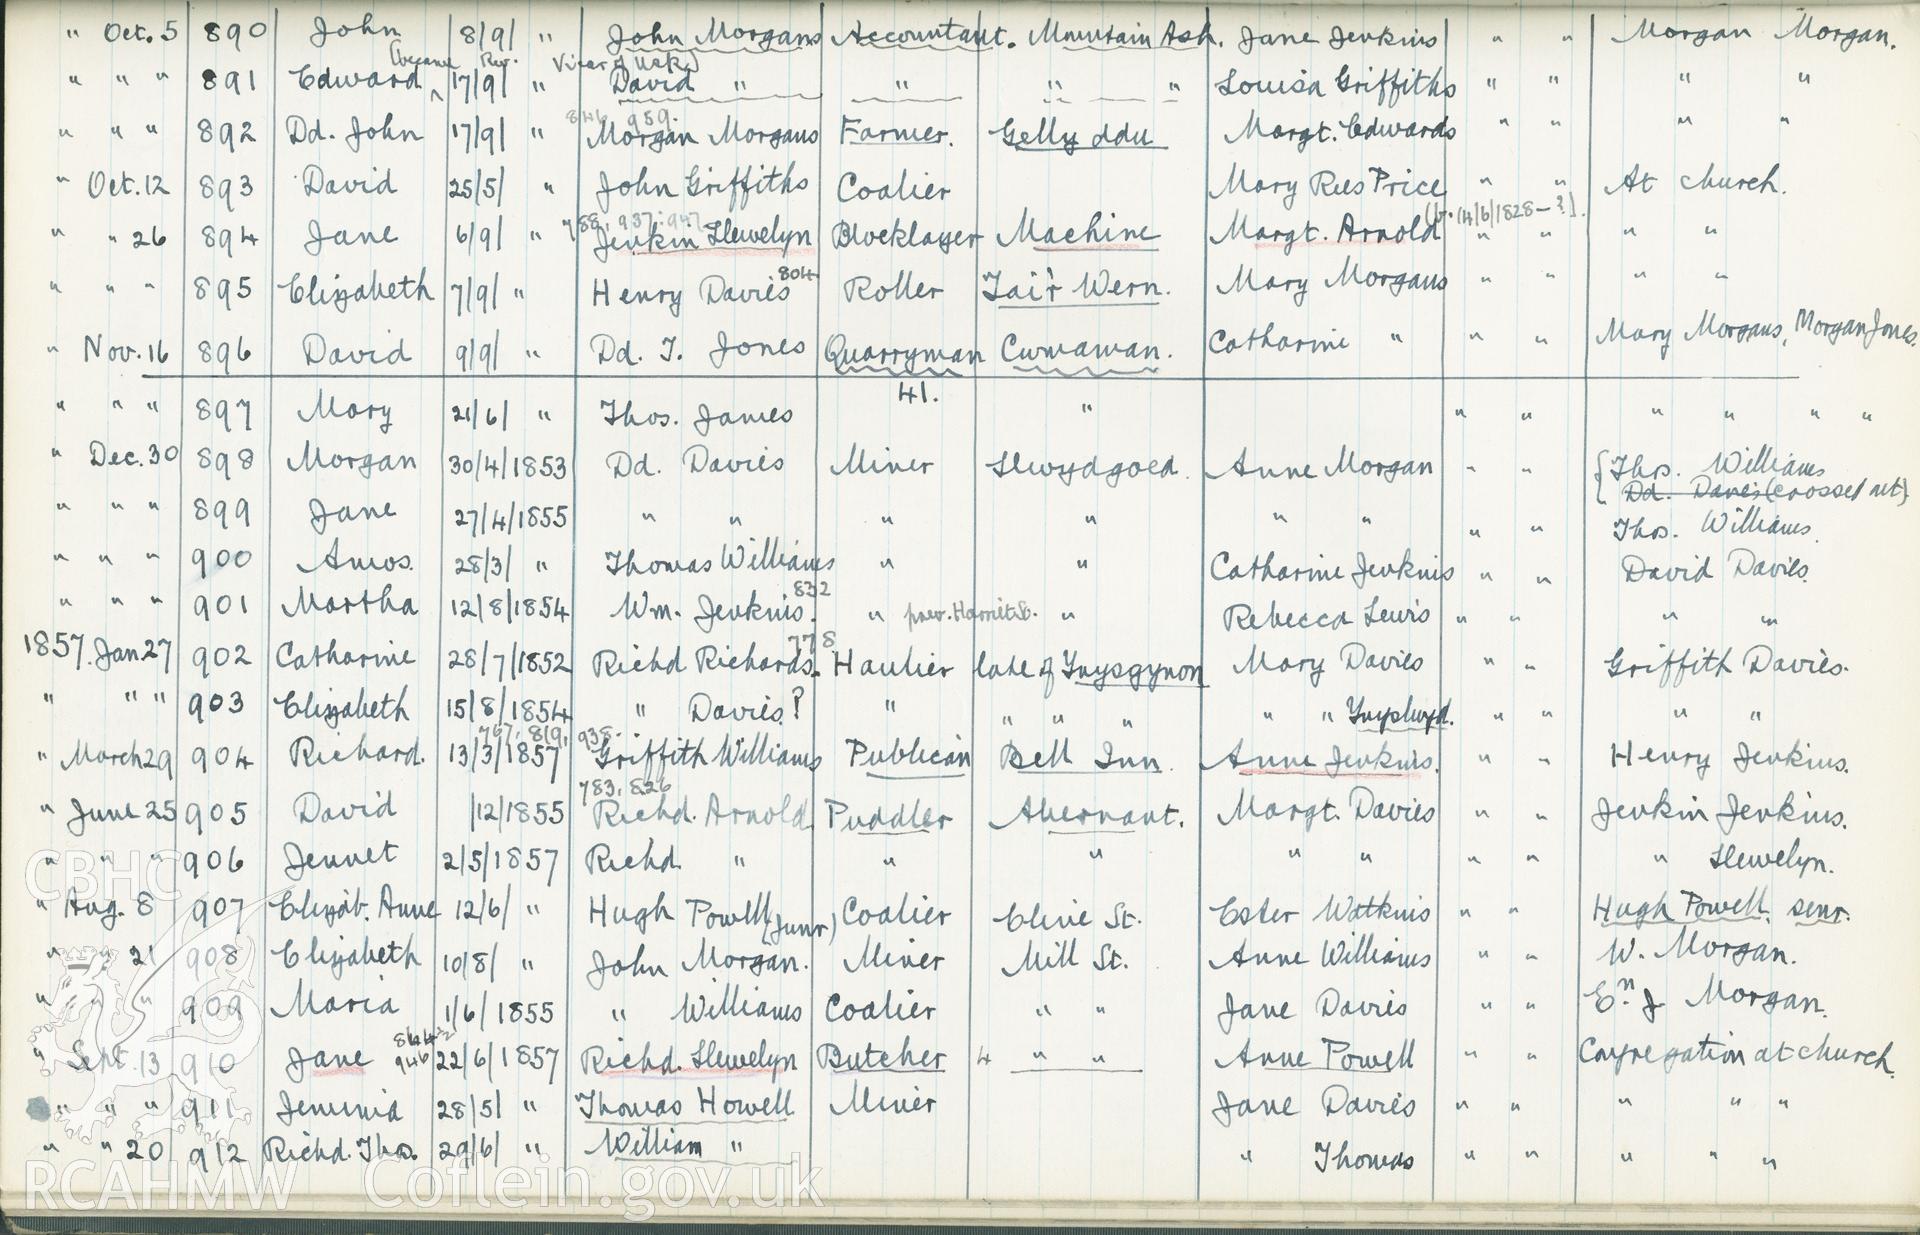 "Baptism Registered" book for Hen Dy Cwrdd, made between April 19th and 28th, 1941, by W. W. Price. Page listing baptisms from 5th October 1856 to 20th September 1857. Donated to the RCAHMW as part of the Digital Dissent Project.